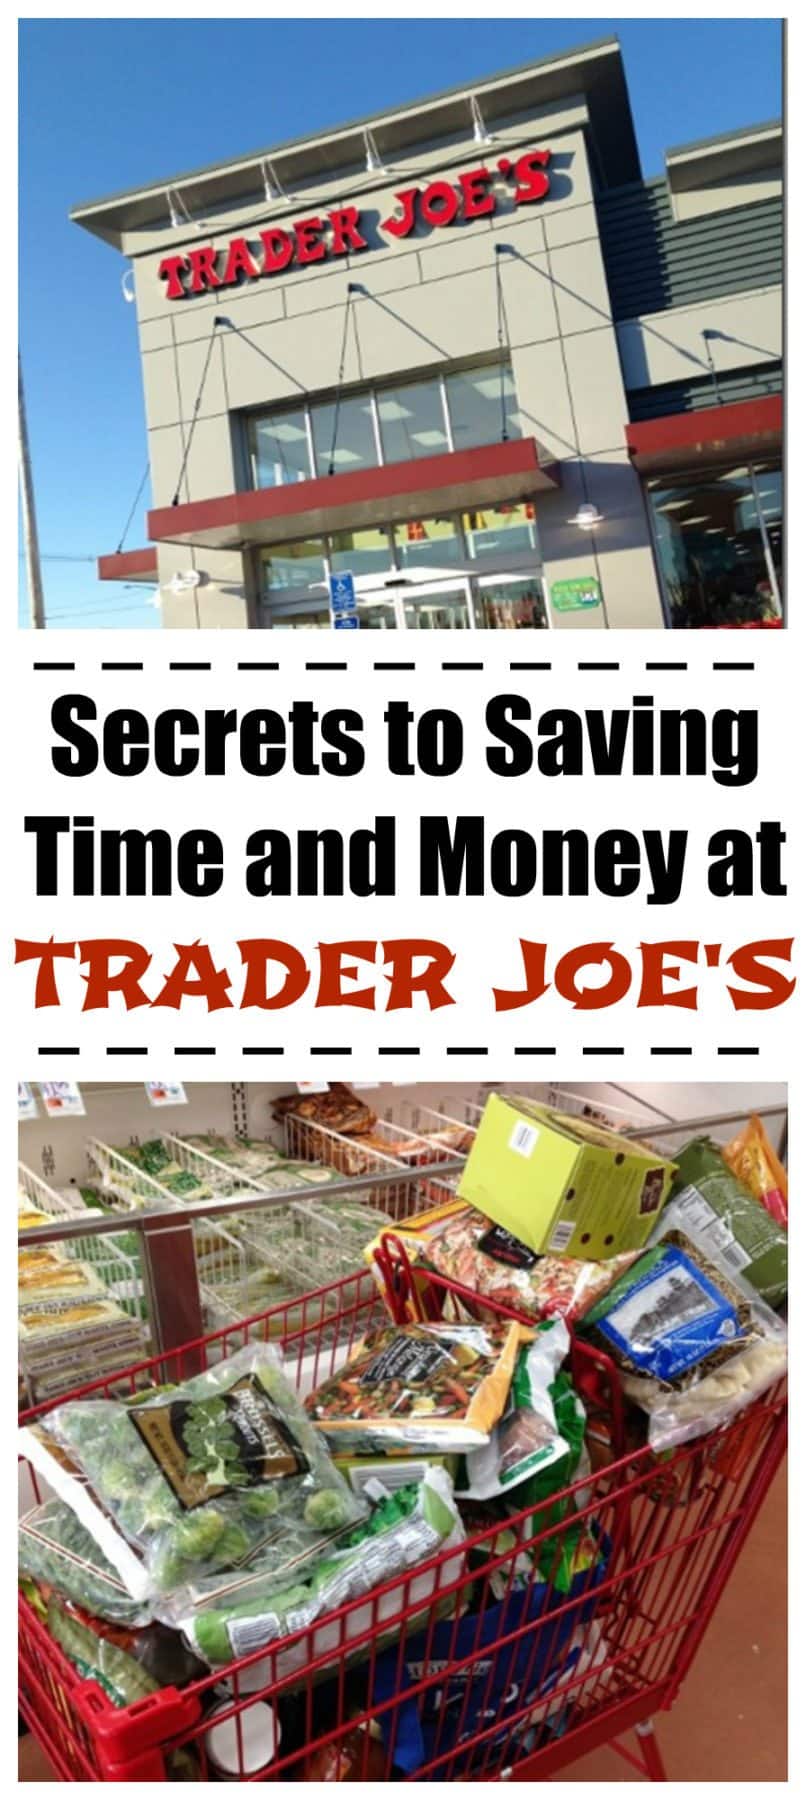 secrets-to-saving-time-and-money-at-trader-joes